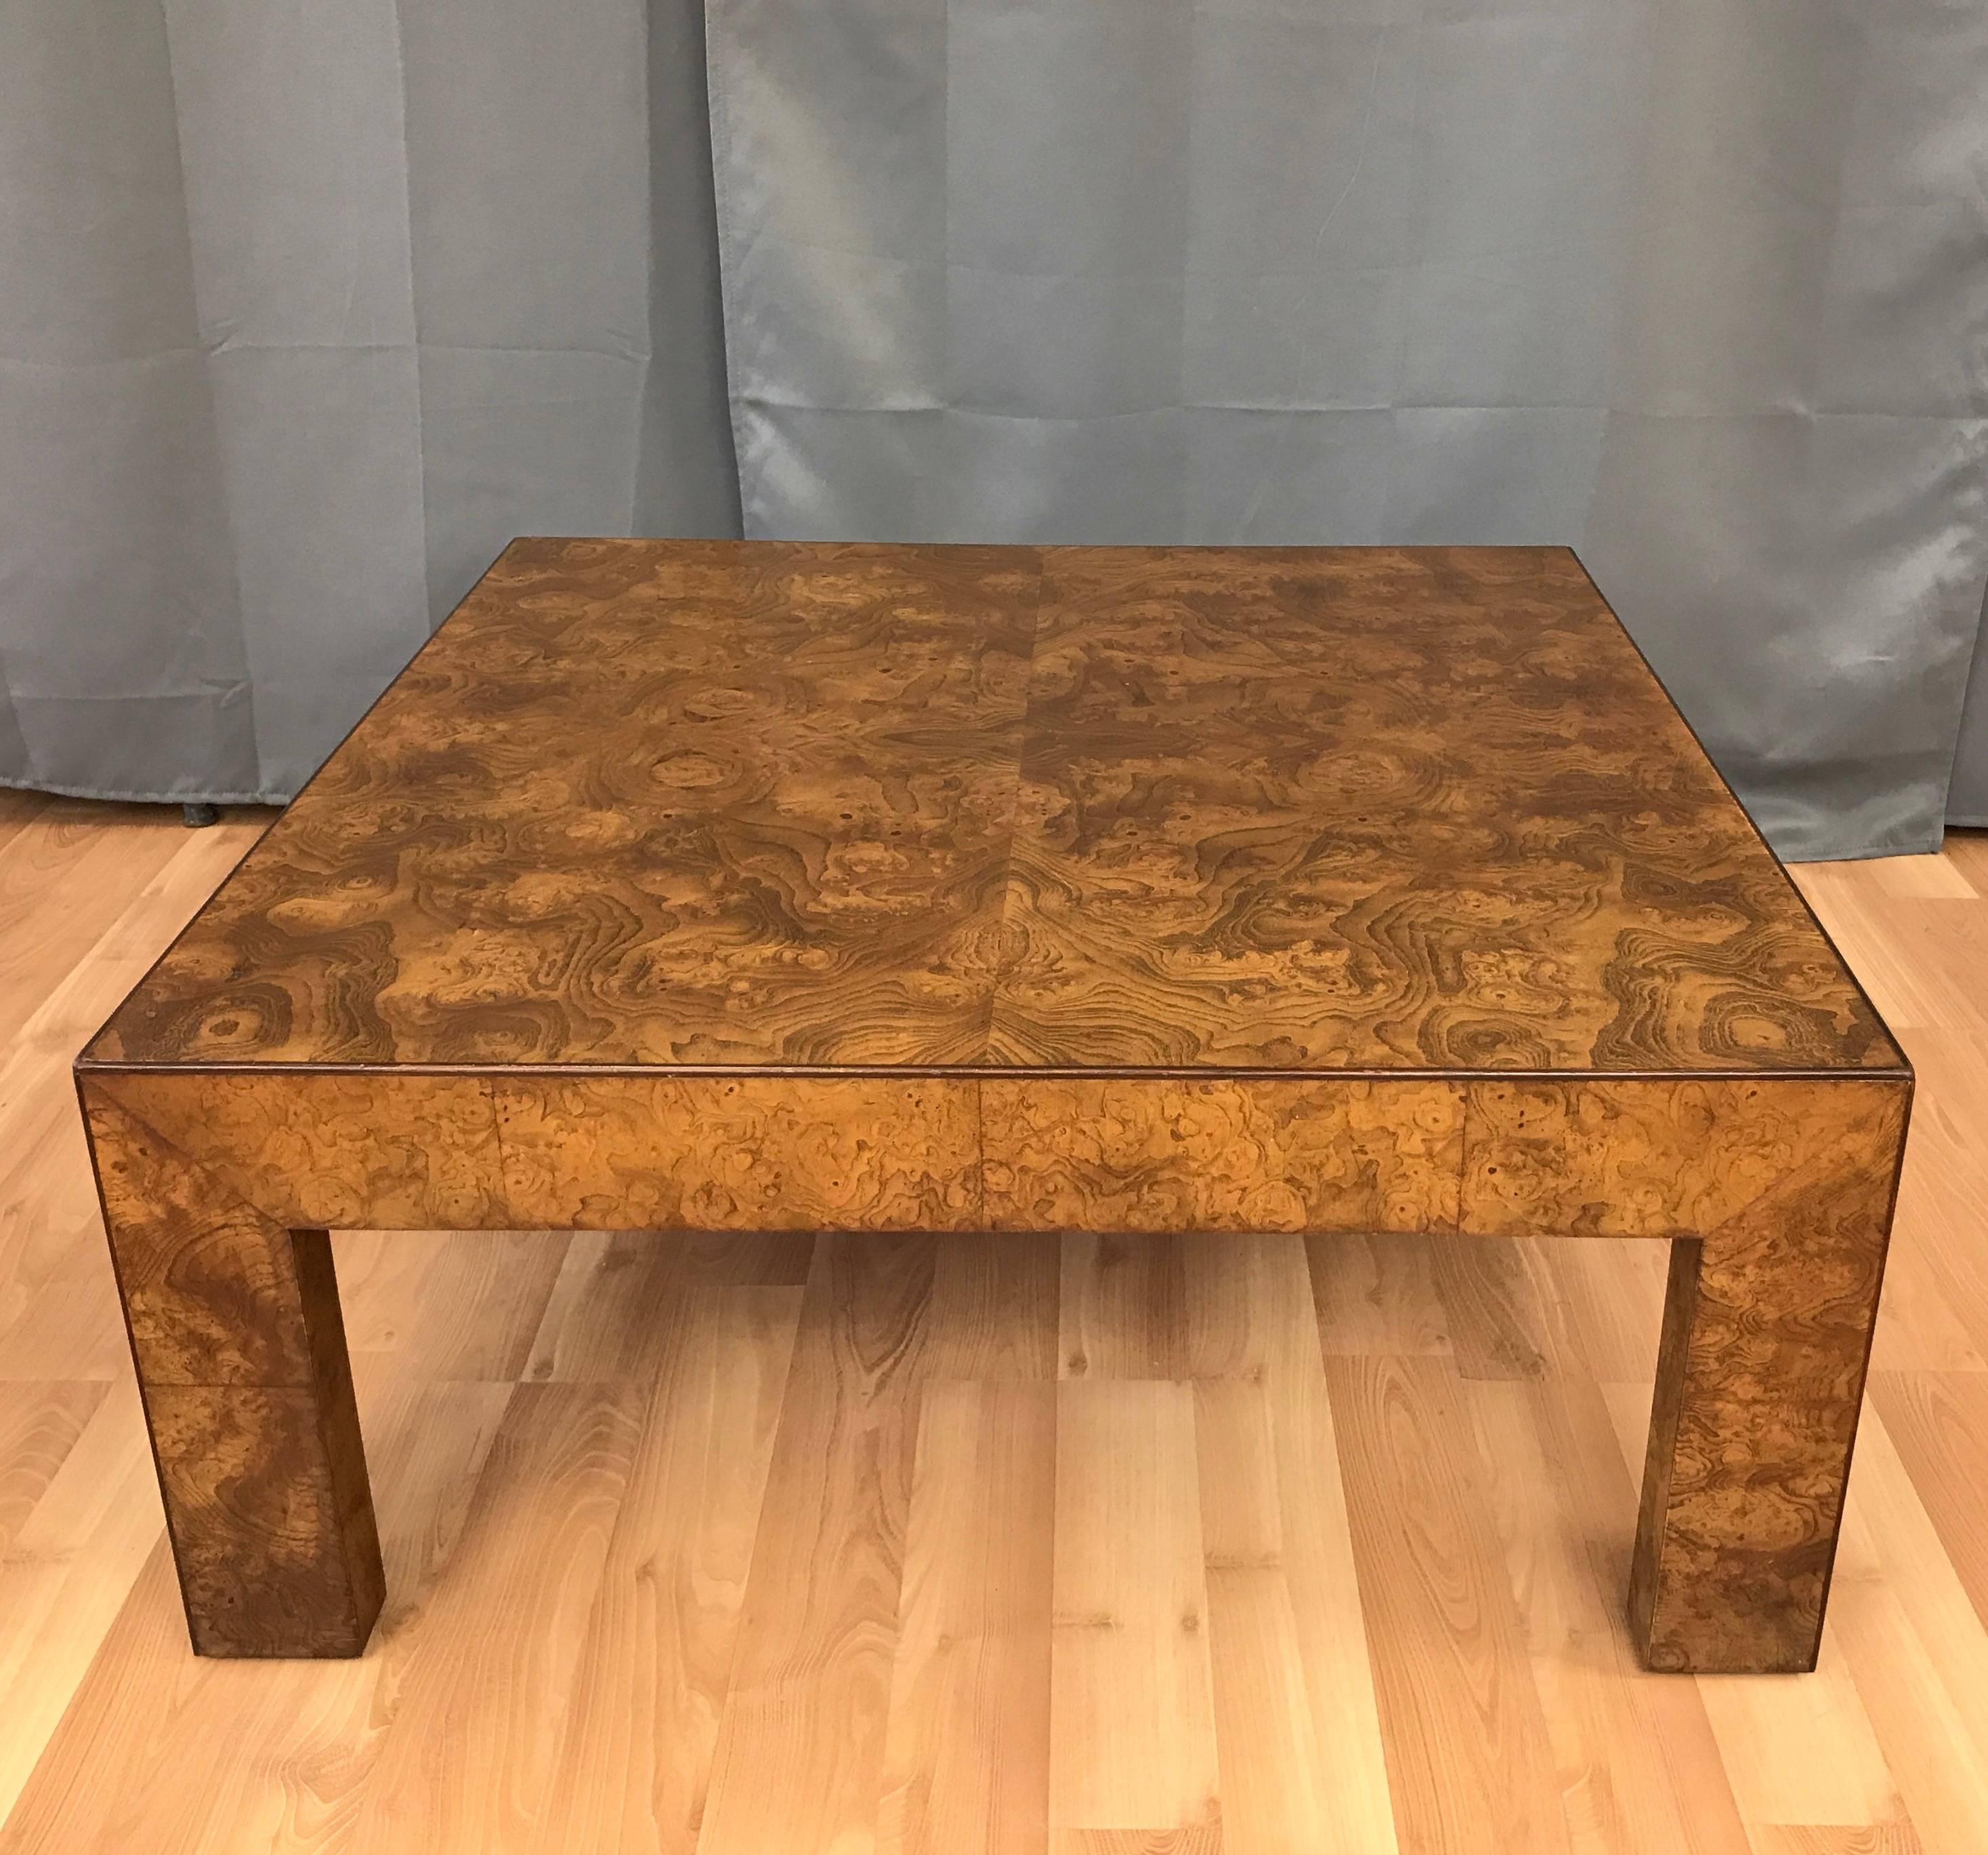 An uncommon and expansive elm burl coffee table by John Widdicomb Co.

Stoutly simple, perfectly proportioned form finished in dazzling elm burl veneer that evokes topographical maps, molten metal, or a Rorschach test writ large. Pentagonal legs